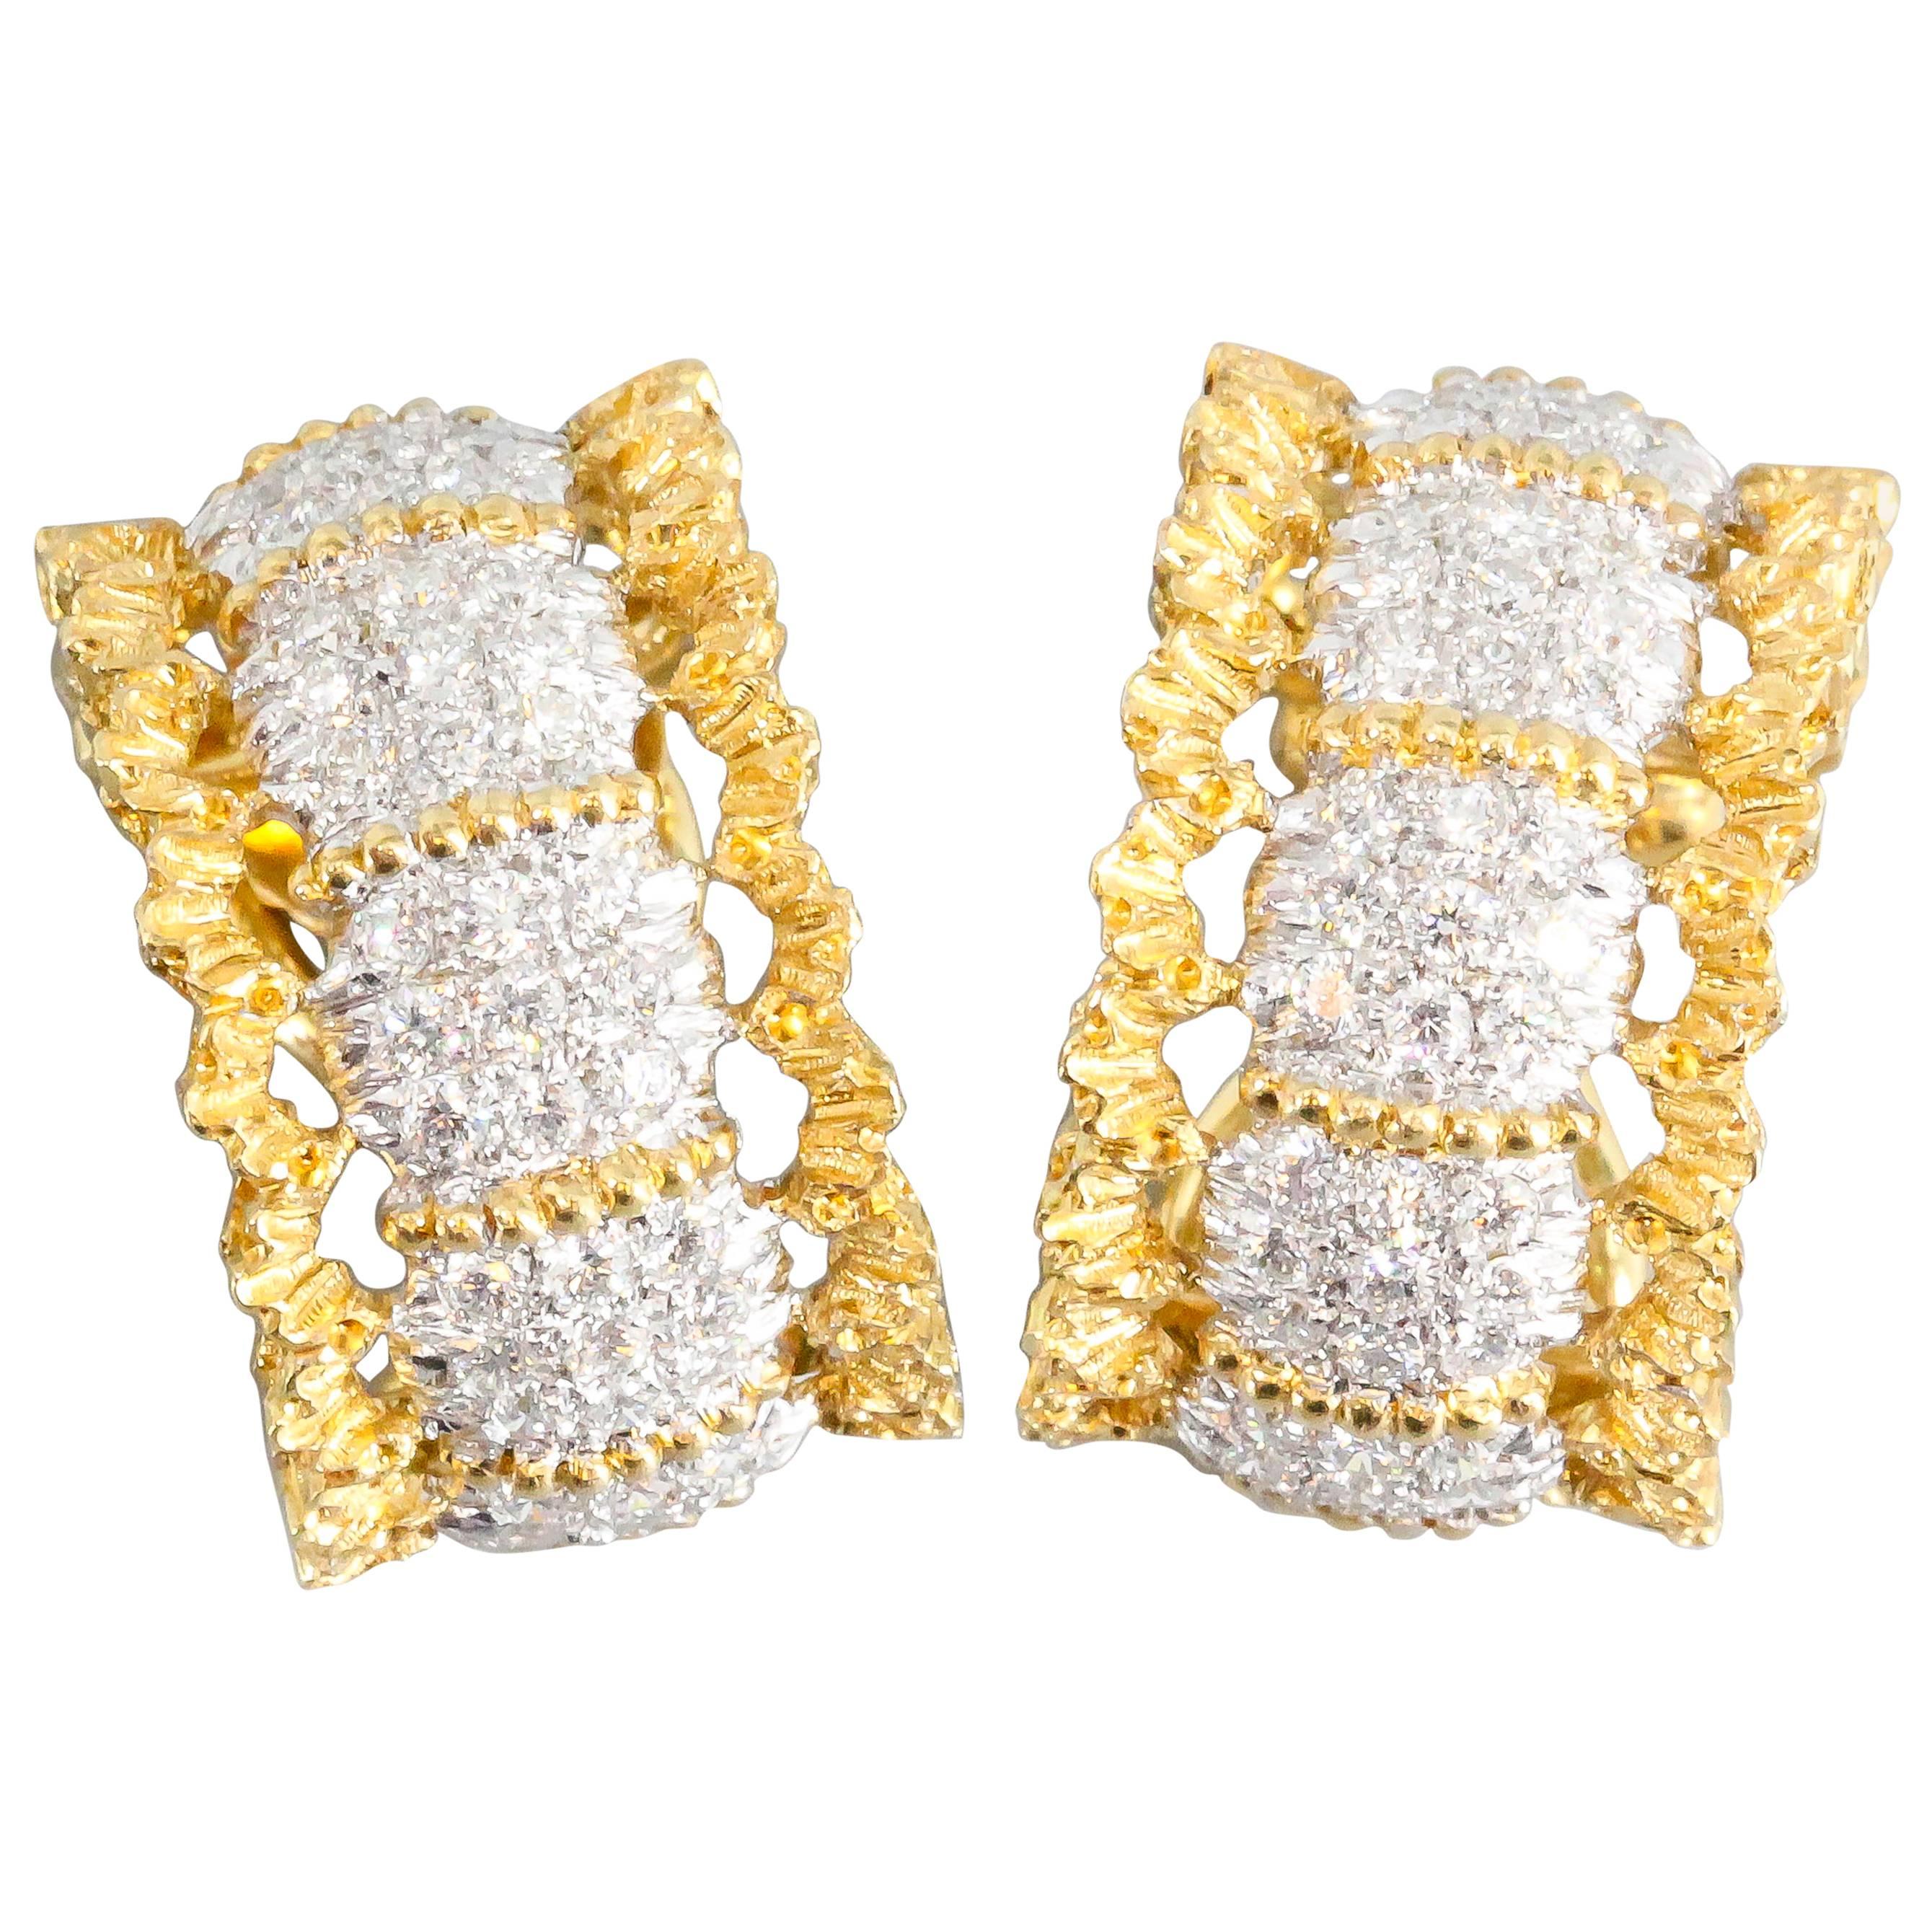 Buccellati Pave Diamond White and Yellow Gold Ear Clips